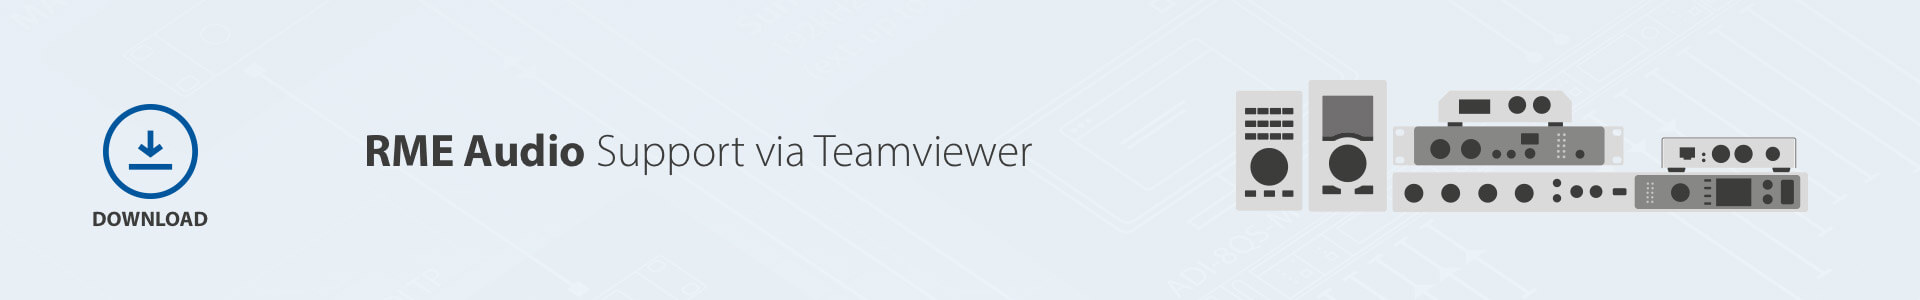 RME Audio Teamviewer Support 